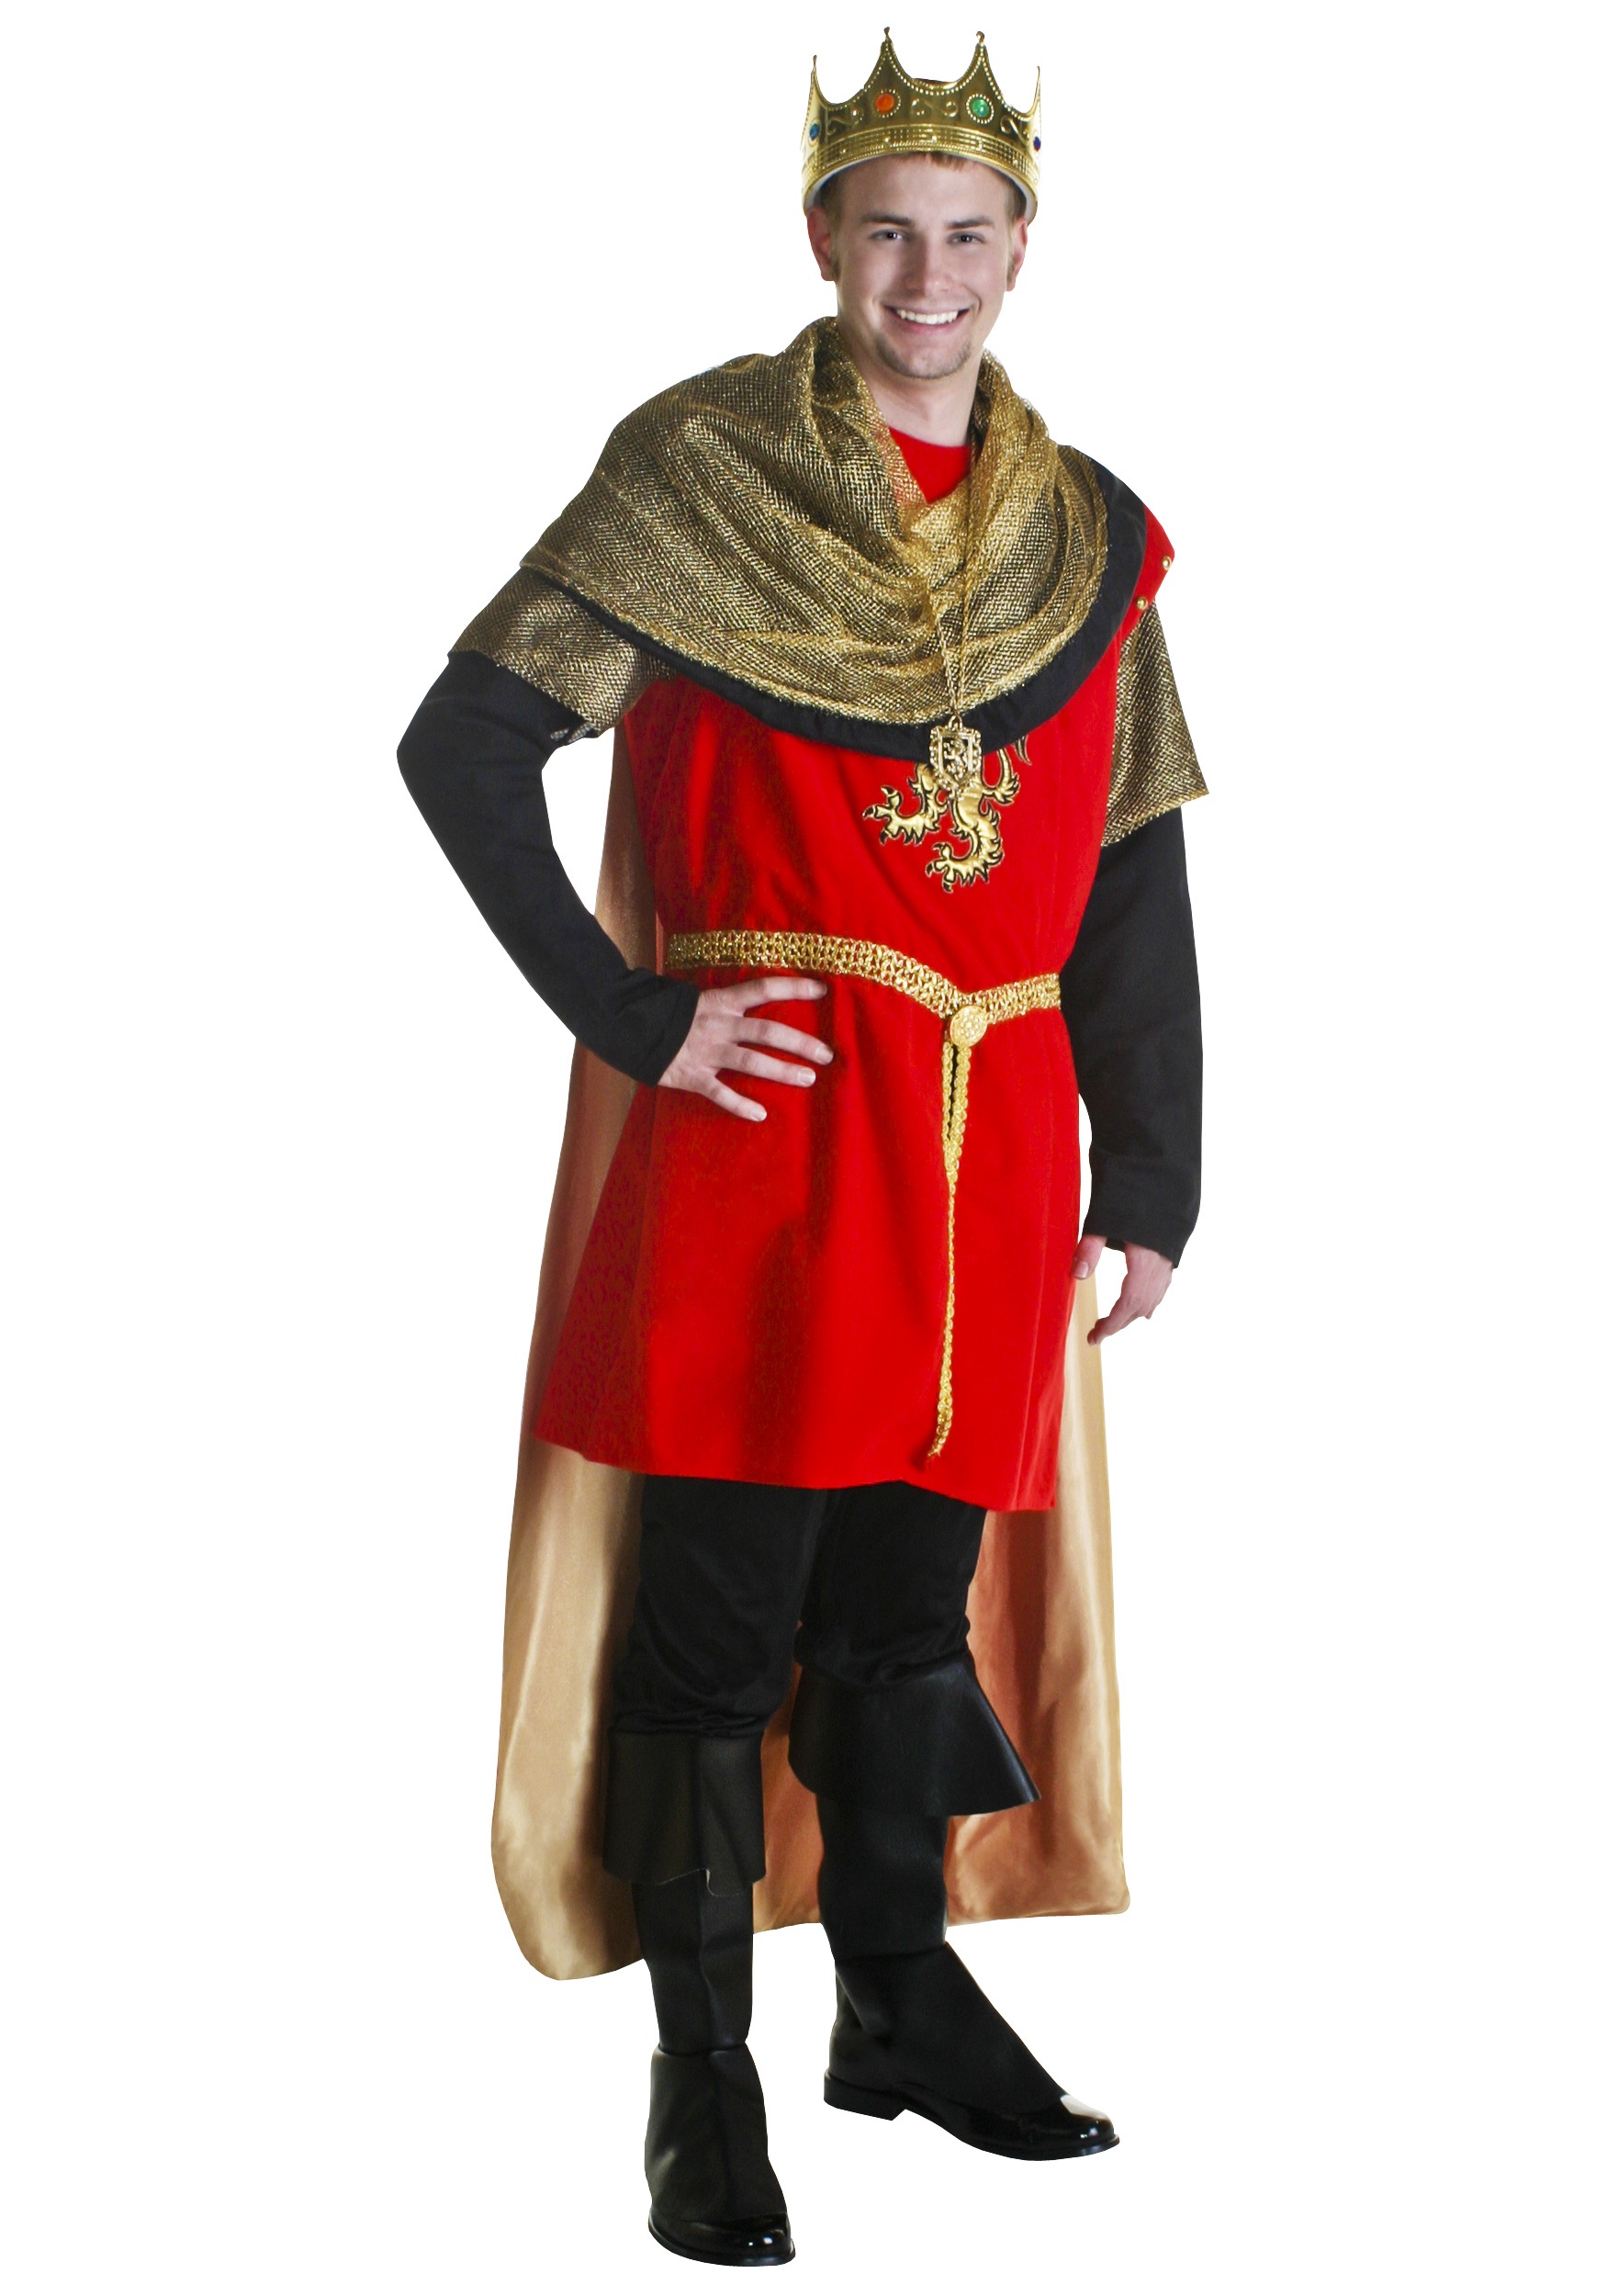 Adult King Henry Costume 